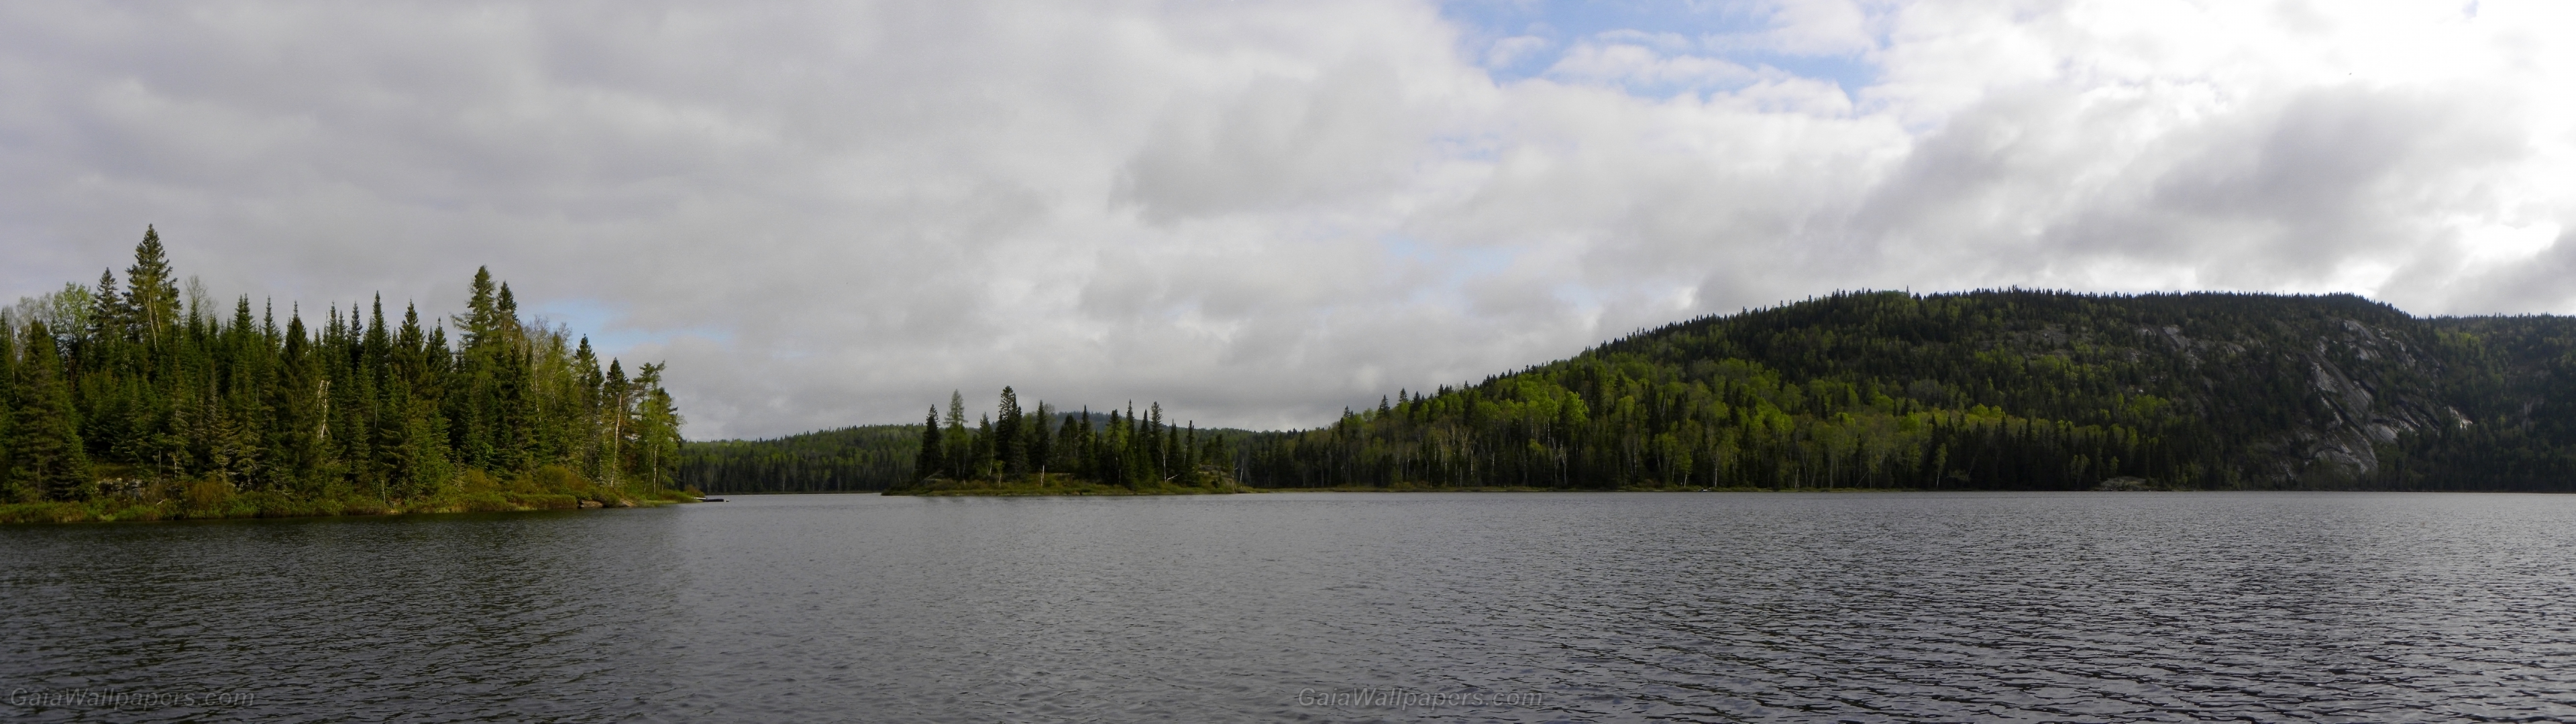 Beautiful cloudy day over a wild lake - Free desktop wallpapers